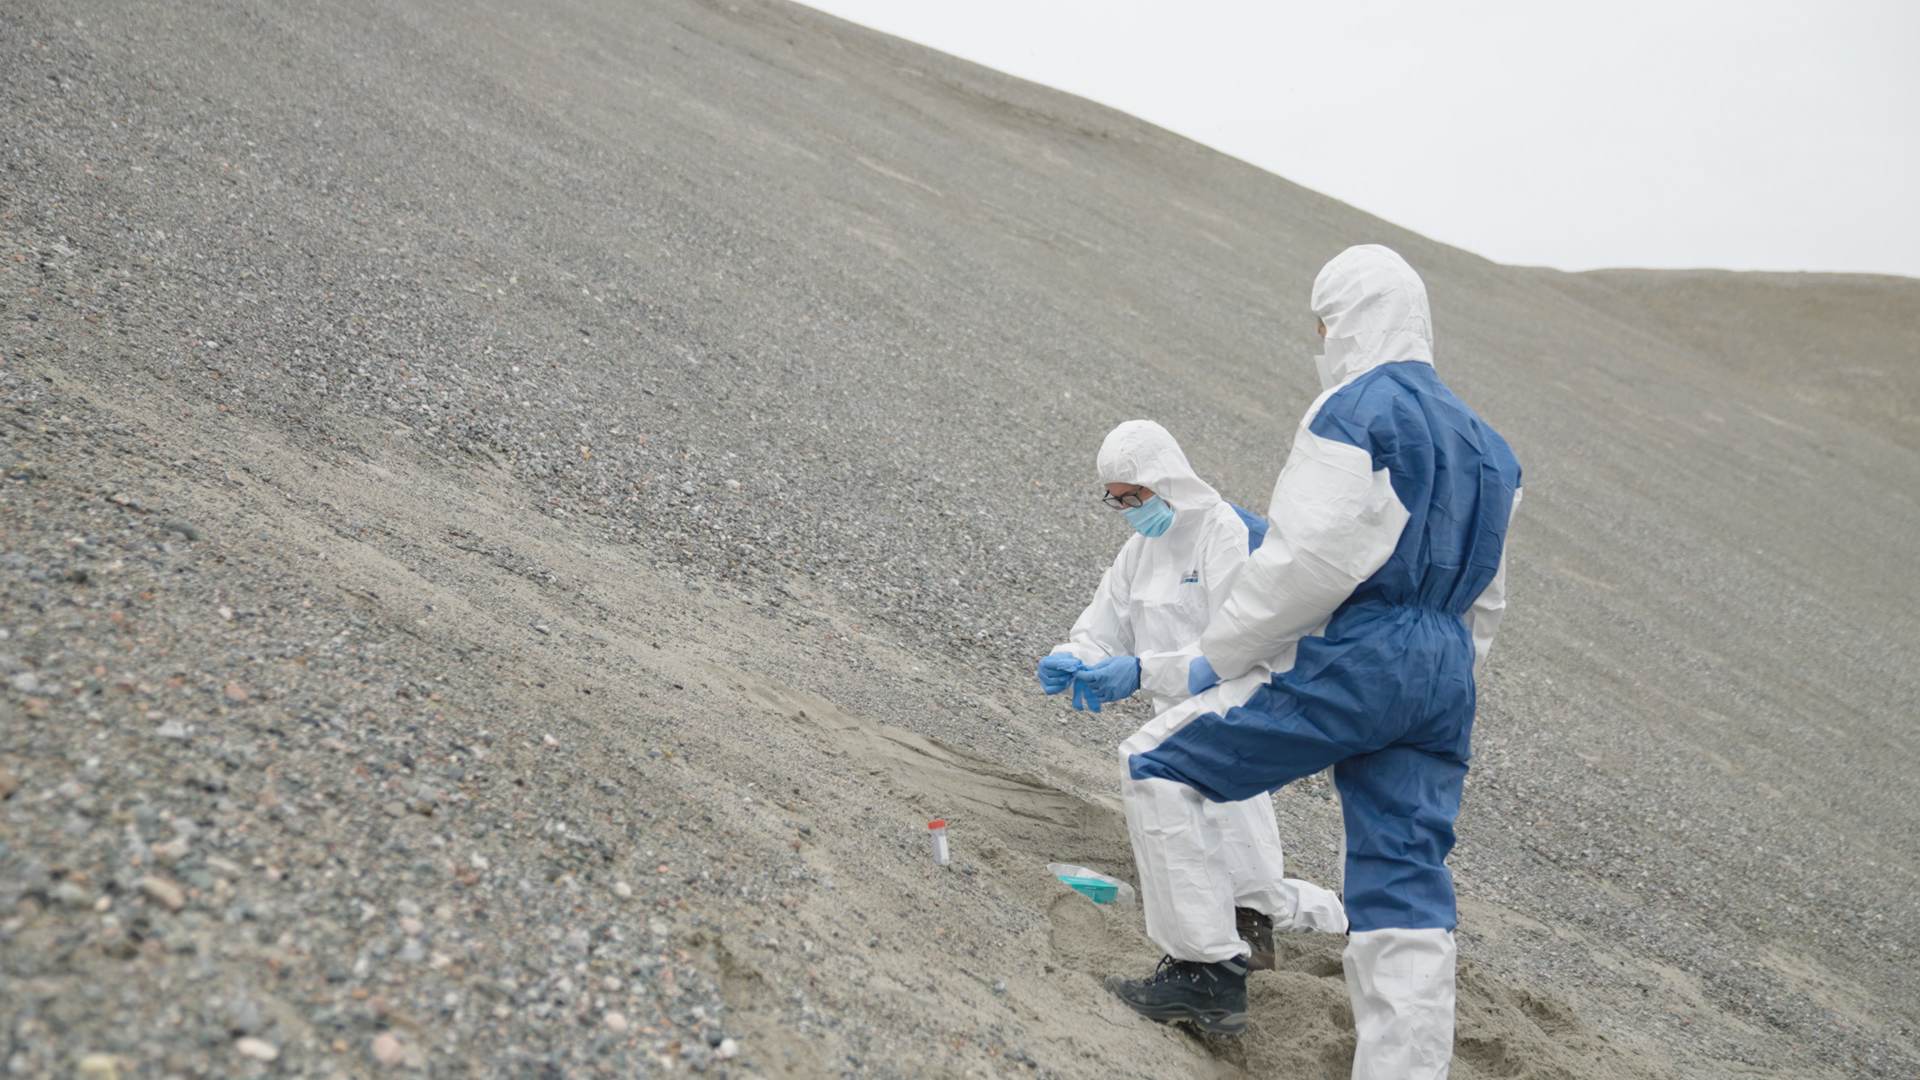 Prof. Eske Willerslev and a colleague sample sediments for environmental DNA in Greenland. Credit: Handful of Films